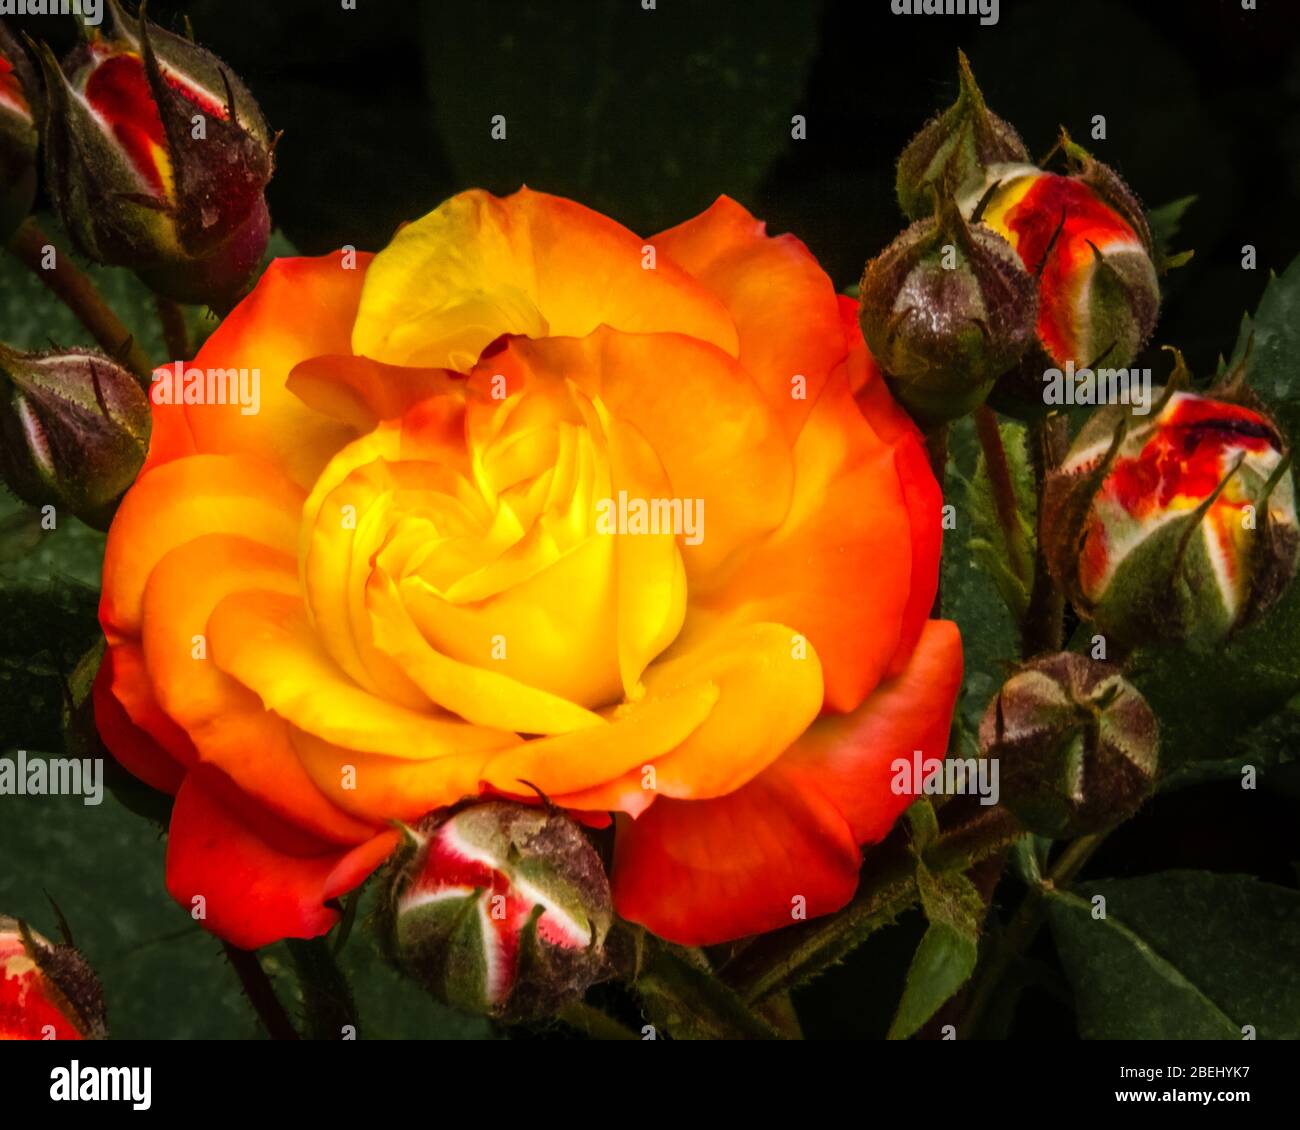 Close up of an orange rose, surrounded by buds. A rose is a woody perennial flowering plant of the genus Rosa, in the family Rosaceae. Stock Photo